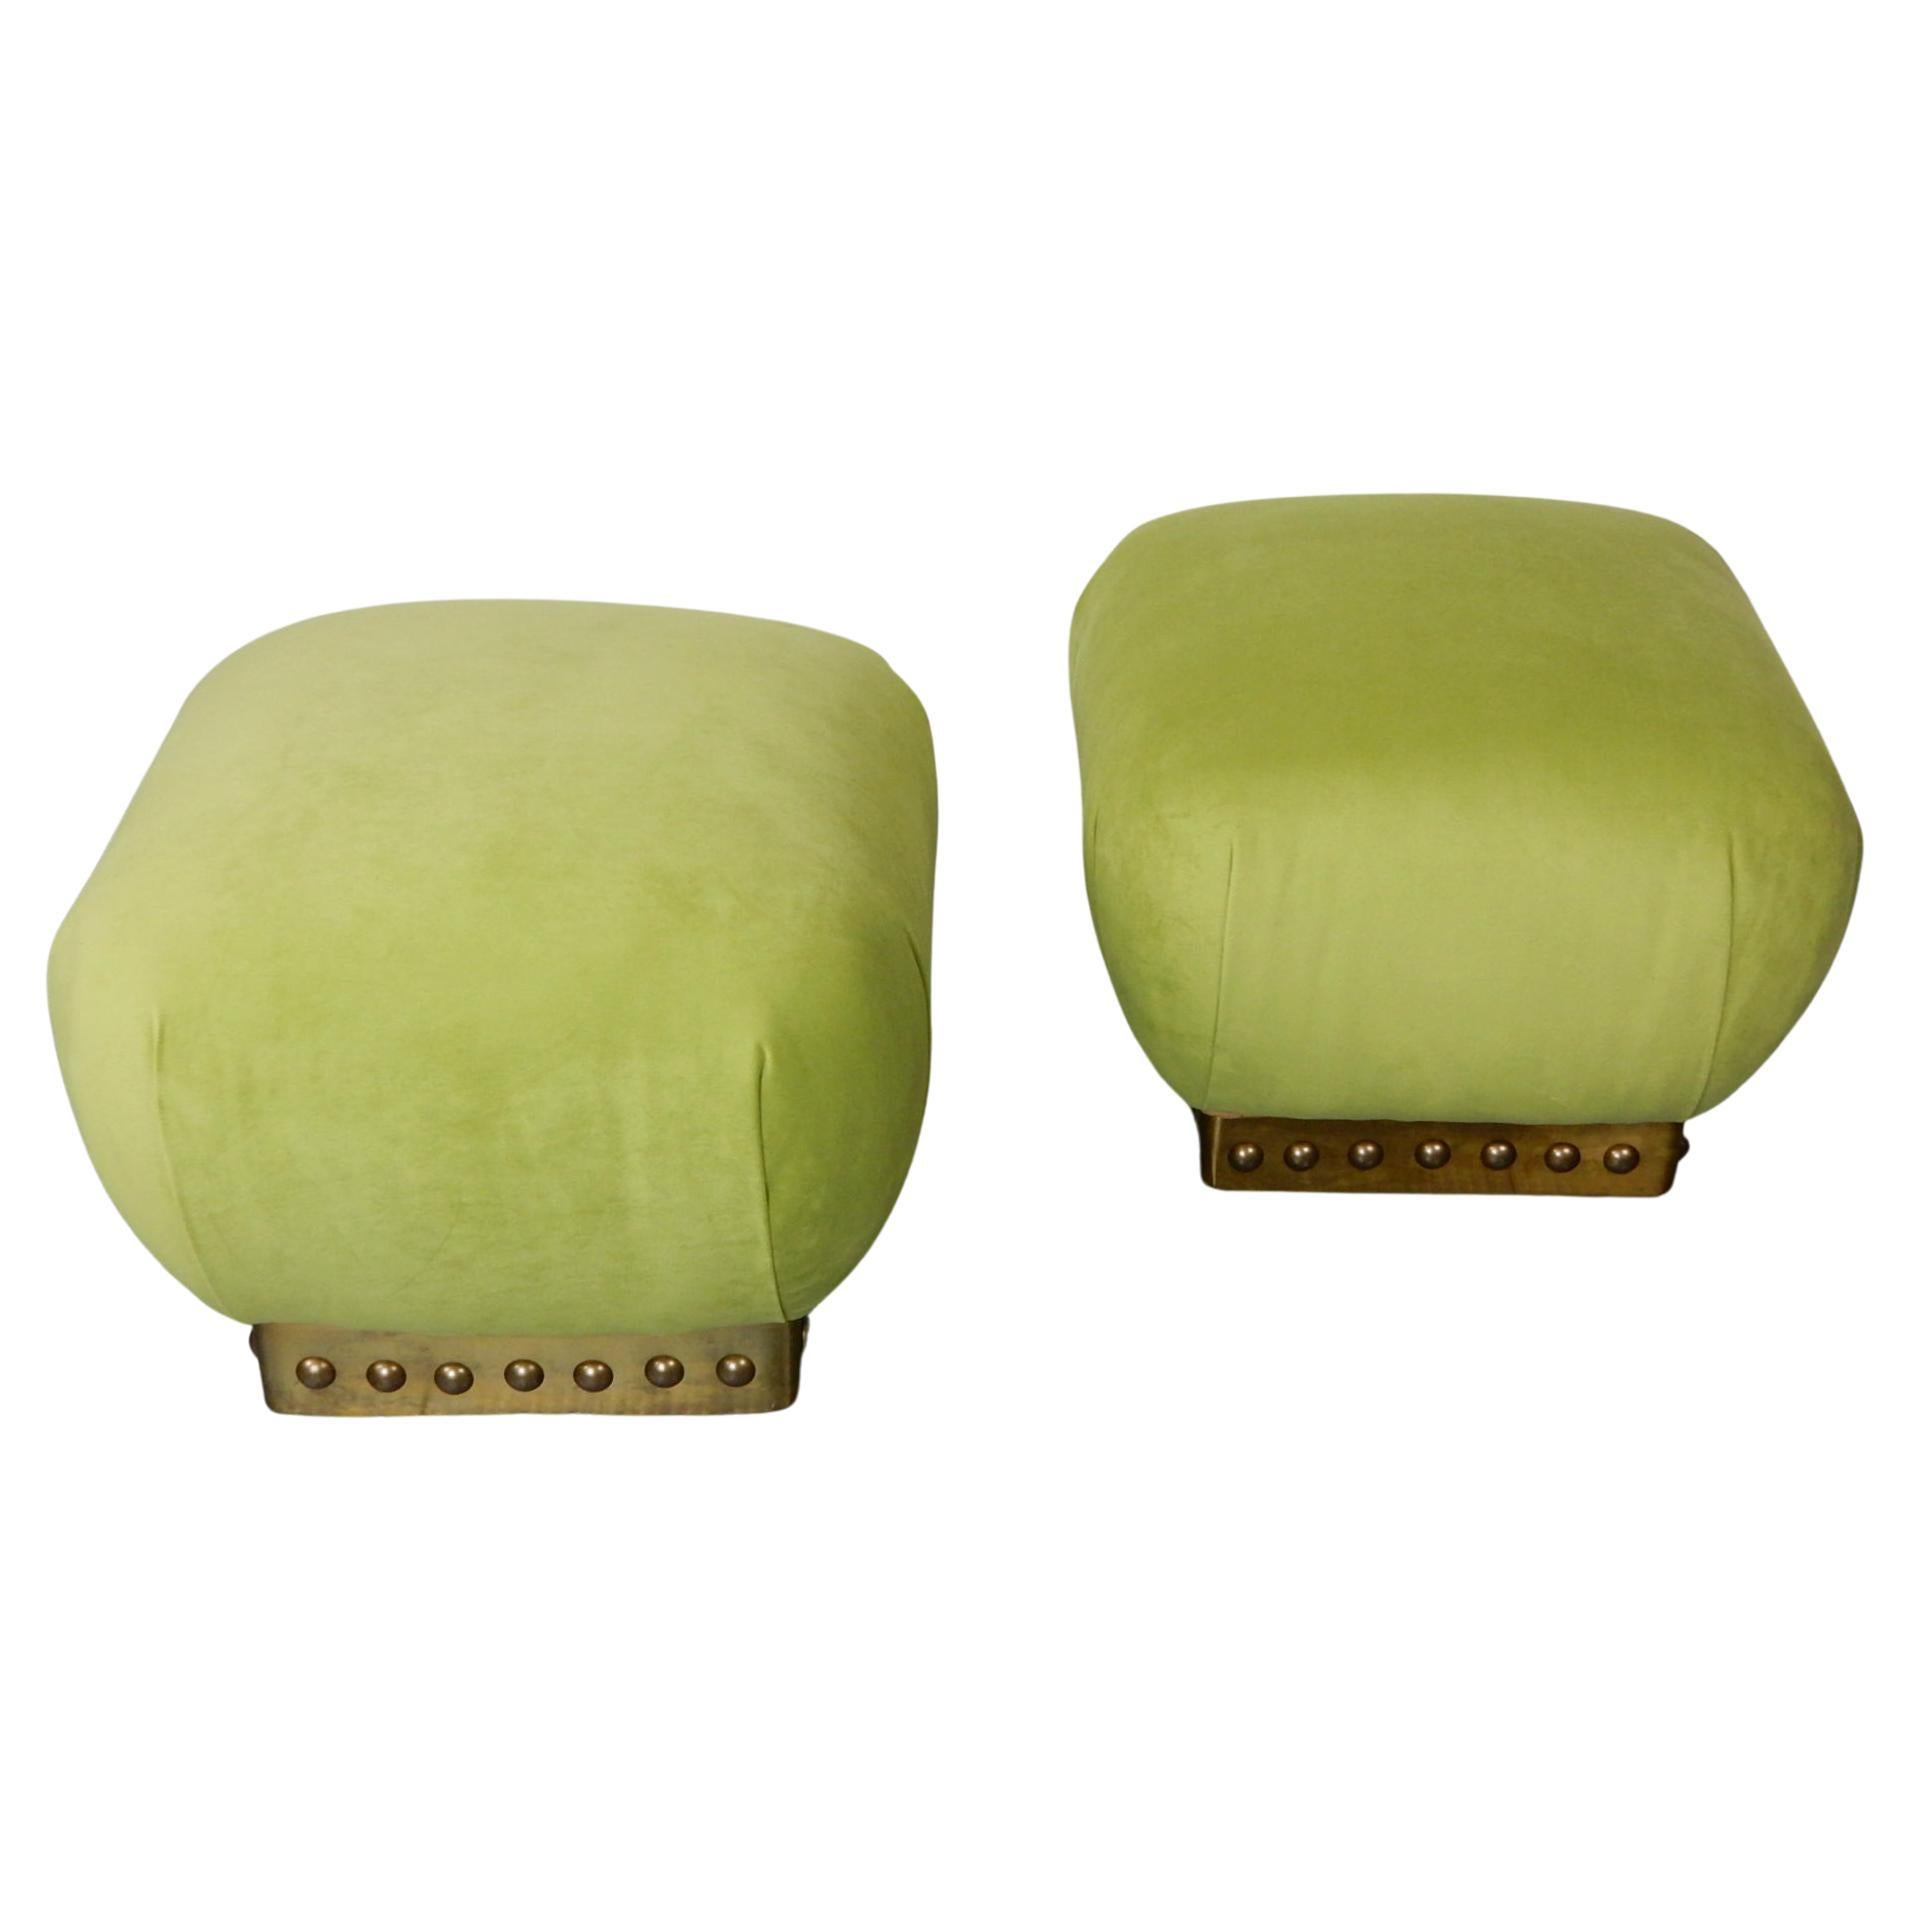 Pair of vintage Pouf ottomans in soft  green velvet.
Brass trimmed bases embellished with large bronze half round dome tacks.
These make perfect extra seating in a living room or bedroom.
Super comfortable and ready to place in your space.
New